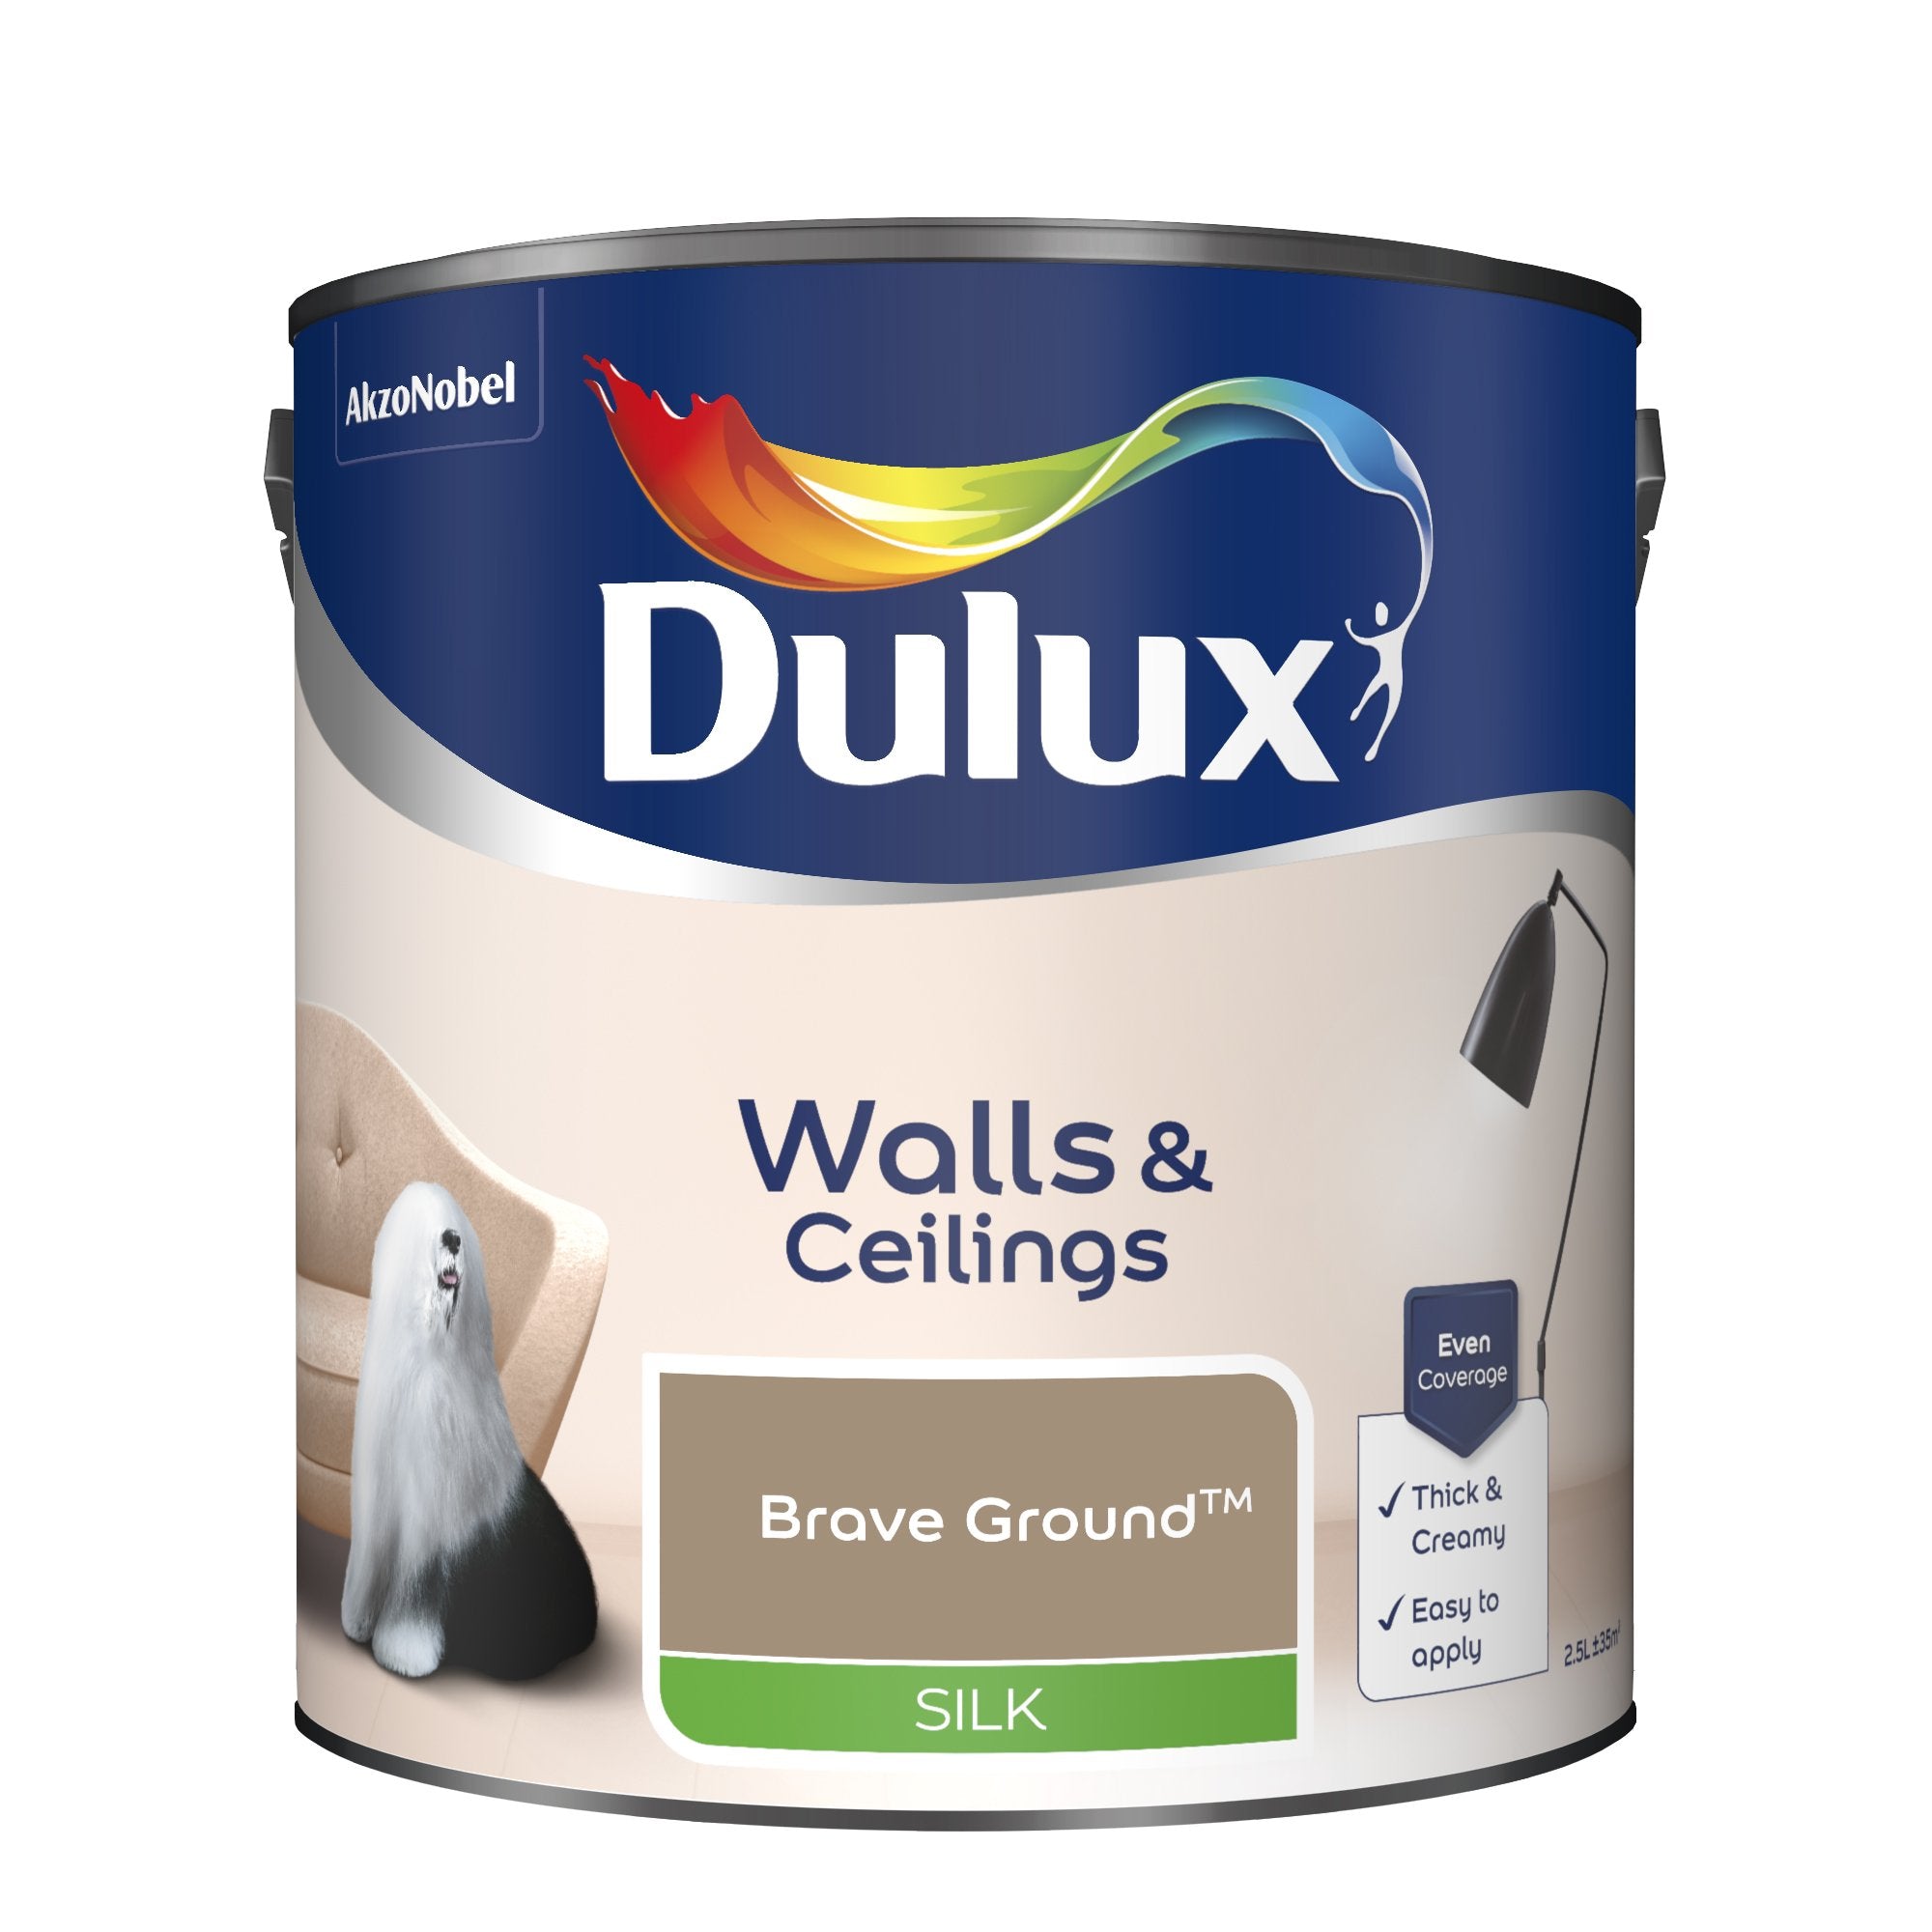 Dulux Silk Emulsion Paint For Walls And Ceilings - Brave Ground 2.5L Garden & Diy  Home Improvements